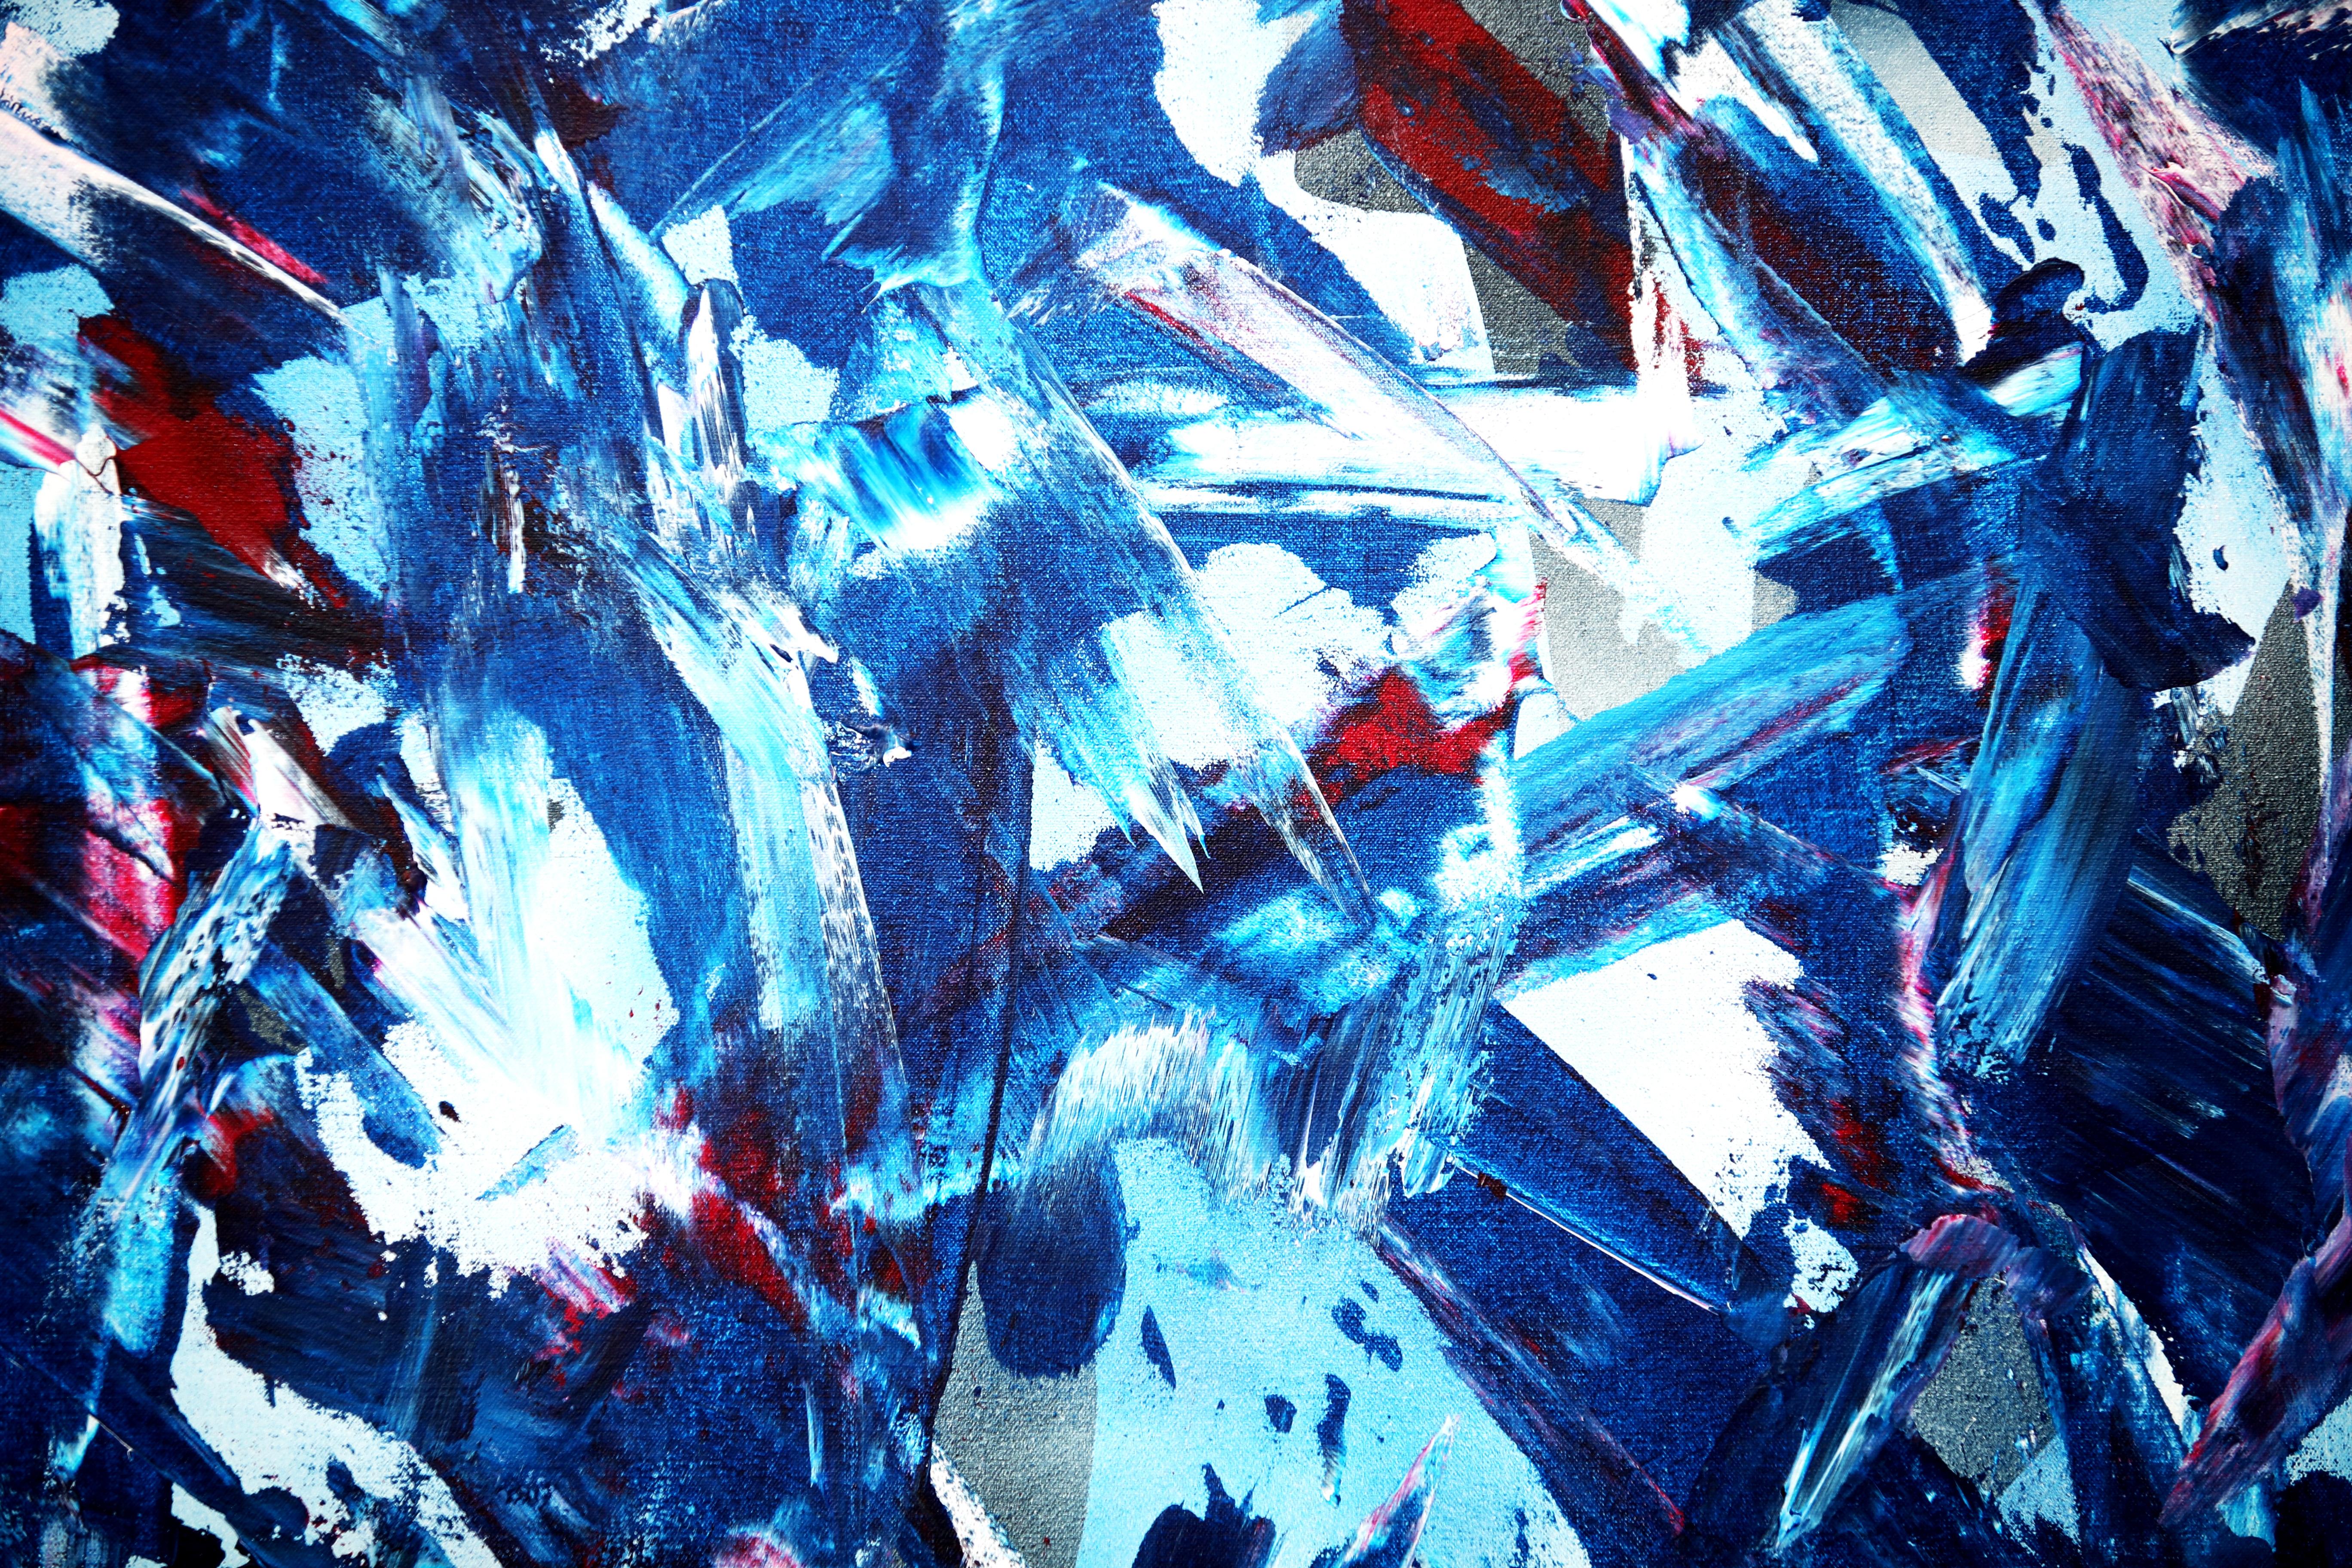 Colour Conflict  - Blue Abstract Painting by Estelle Asmodelle